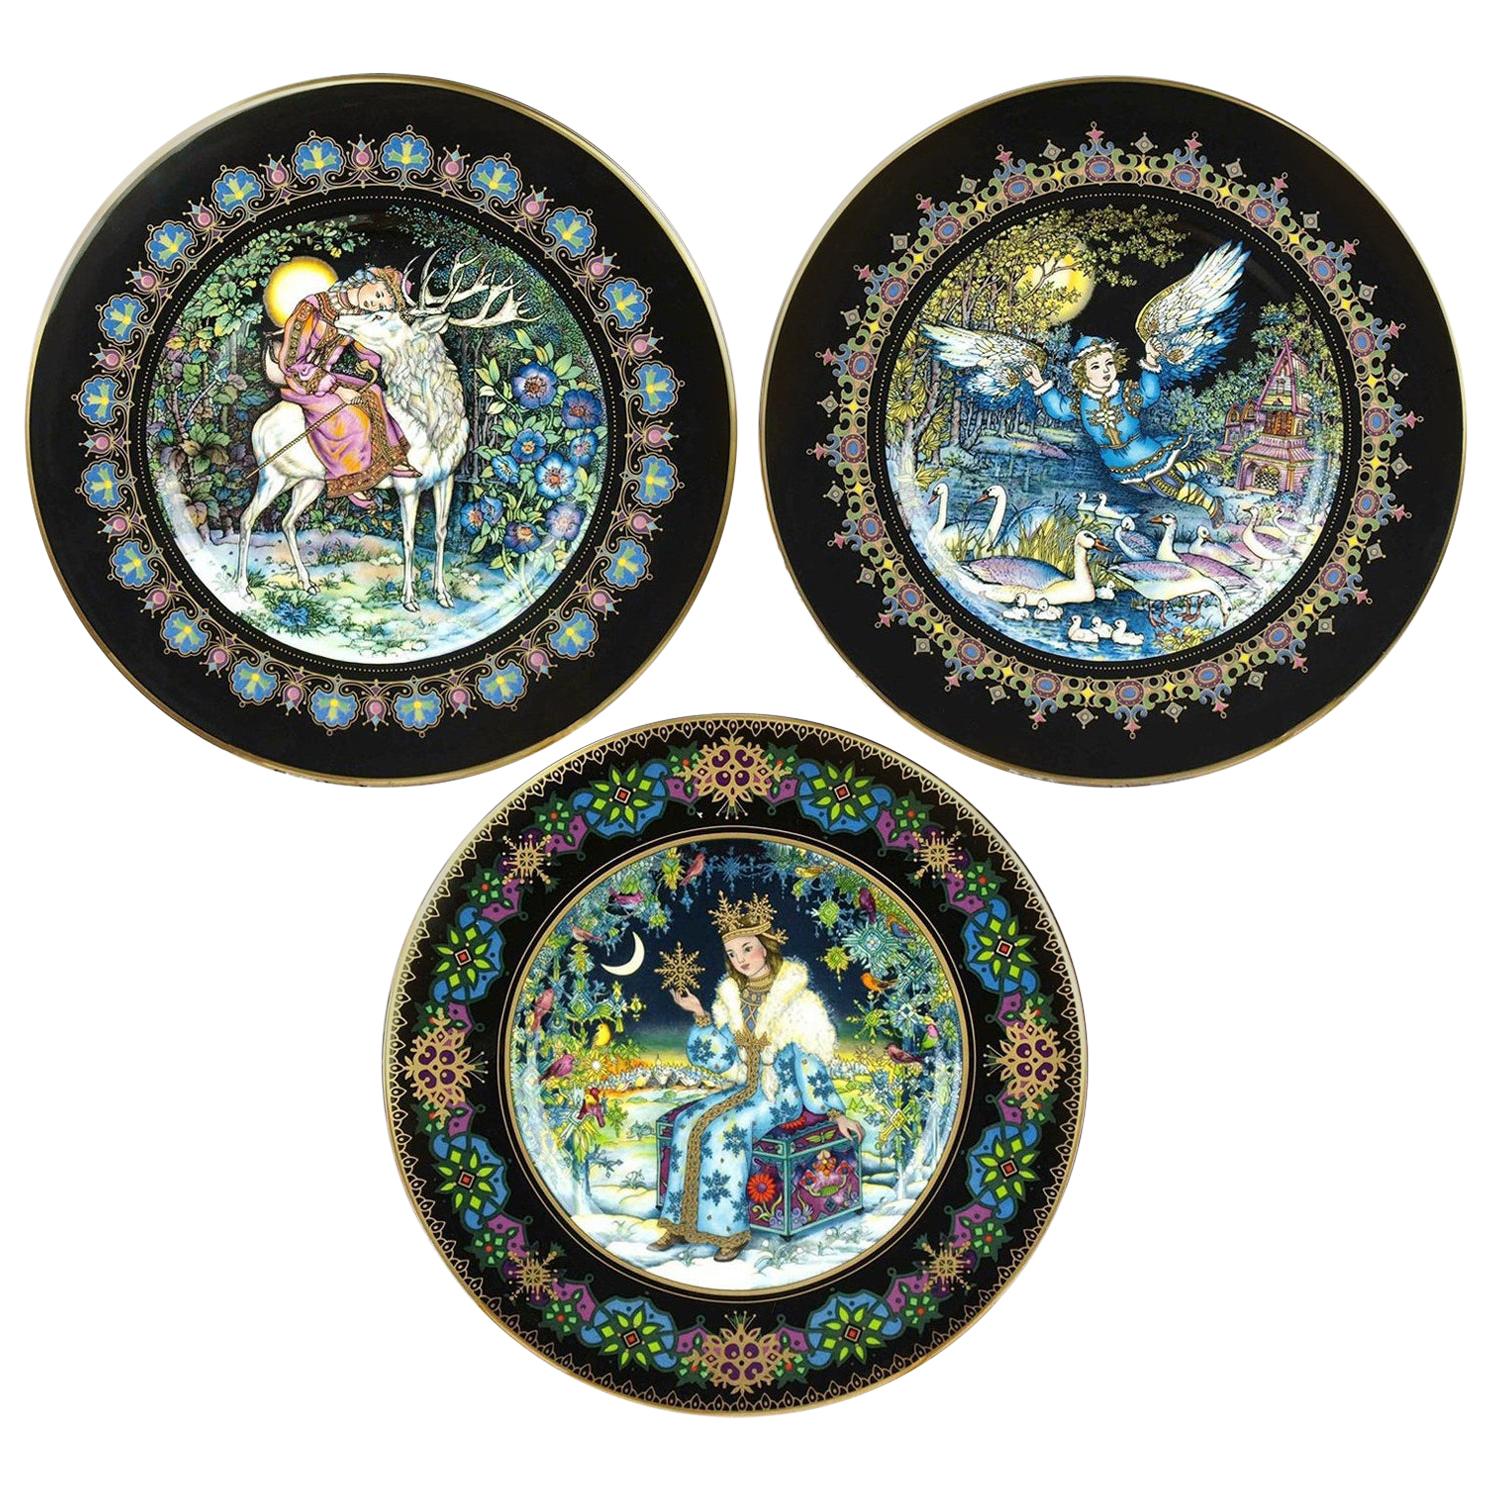 Three Magical Fairy Tales Old Russia Plates by Gere Fauth